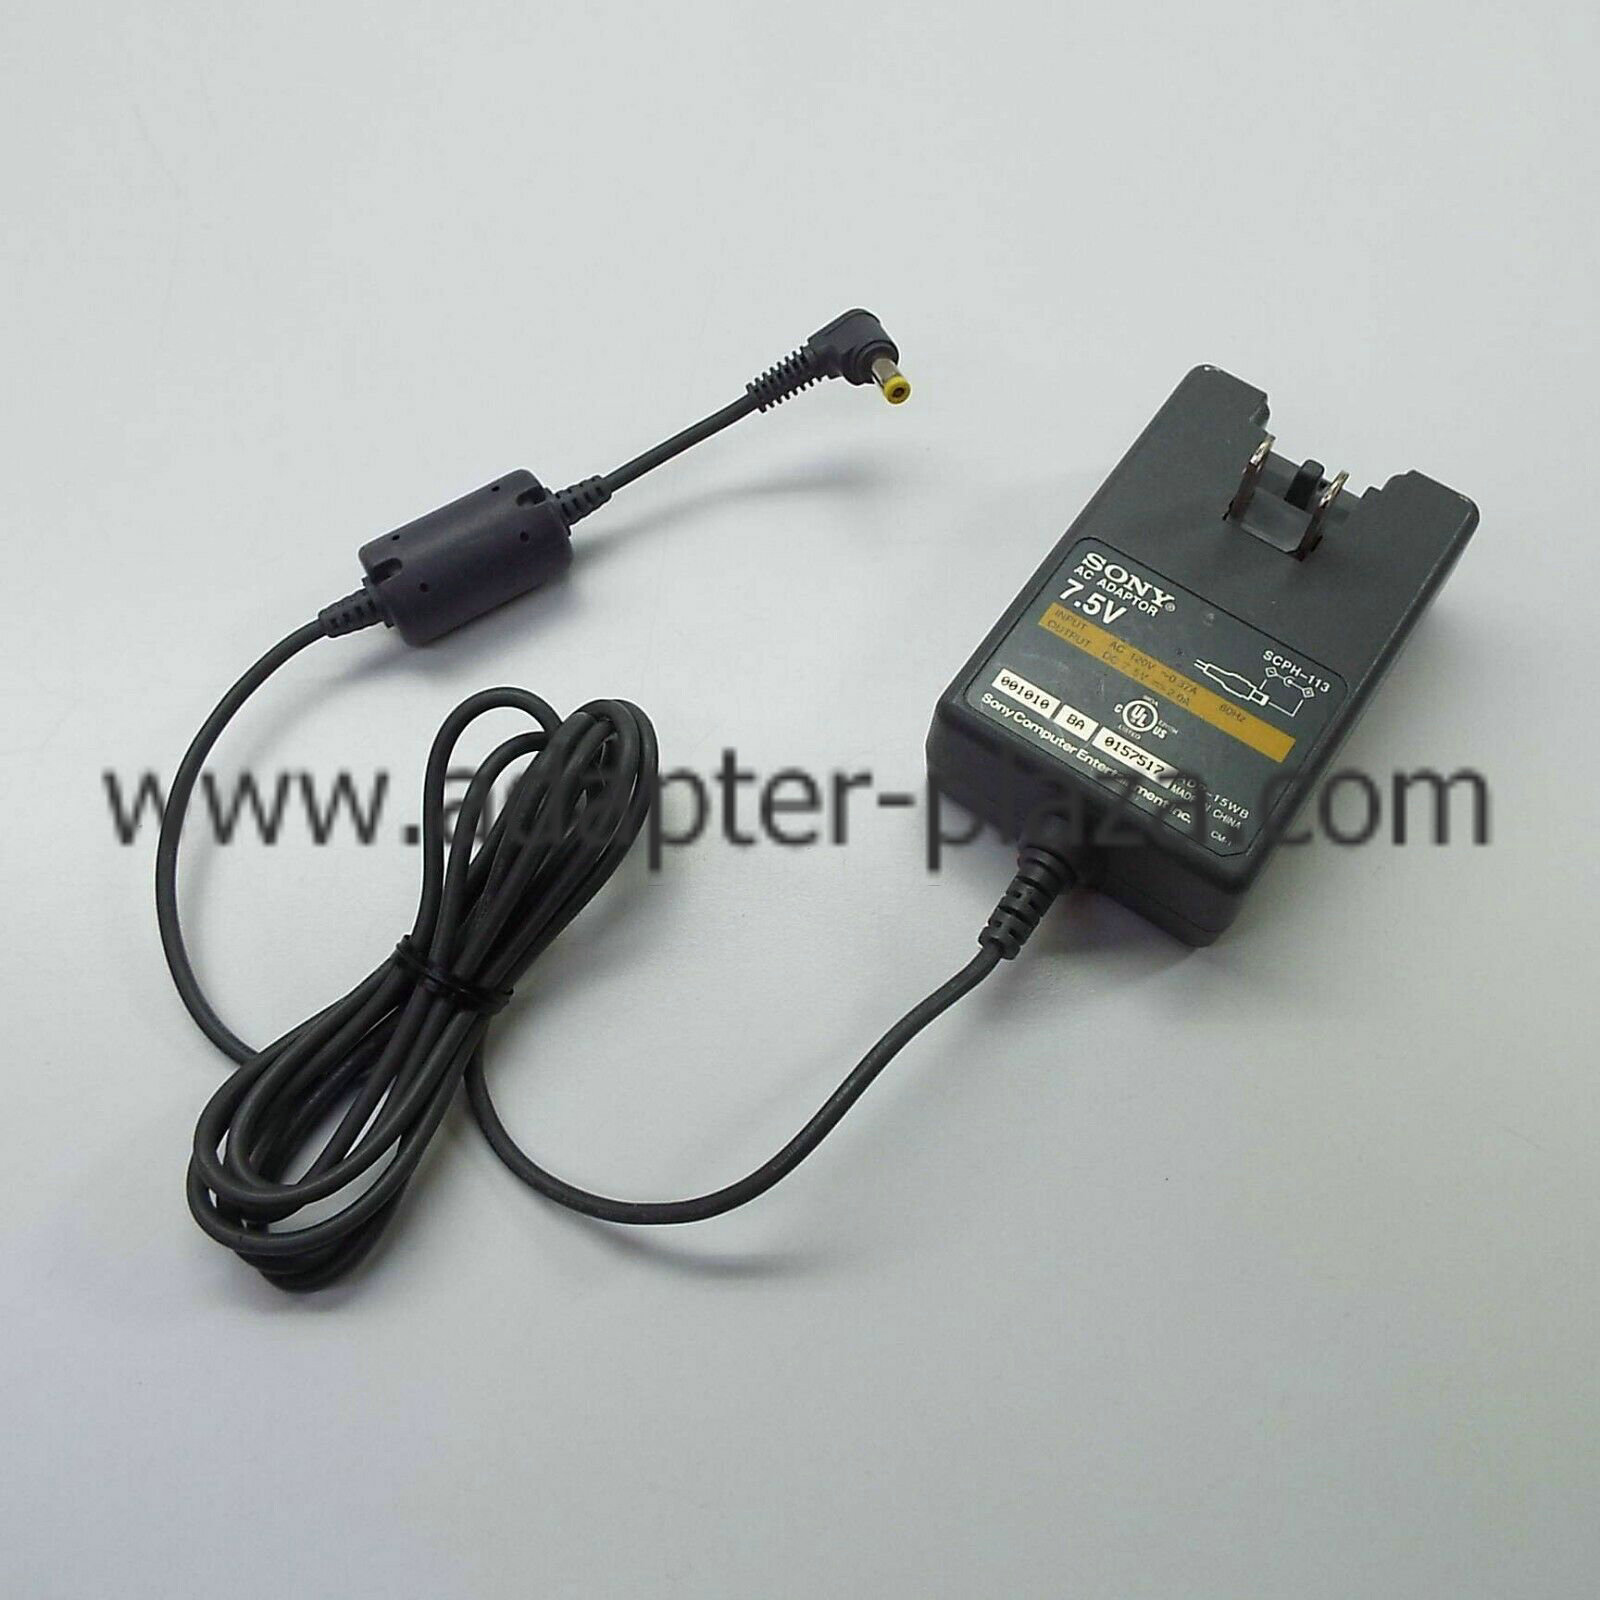 *Brand NEW* Sony SCPH-113 7.5V 2.0mA AC DC Adapter POWER SUPPLY